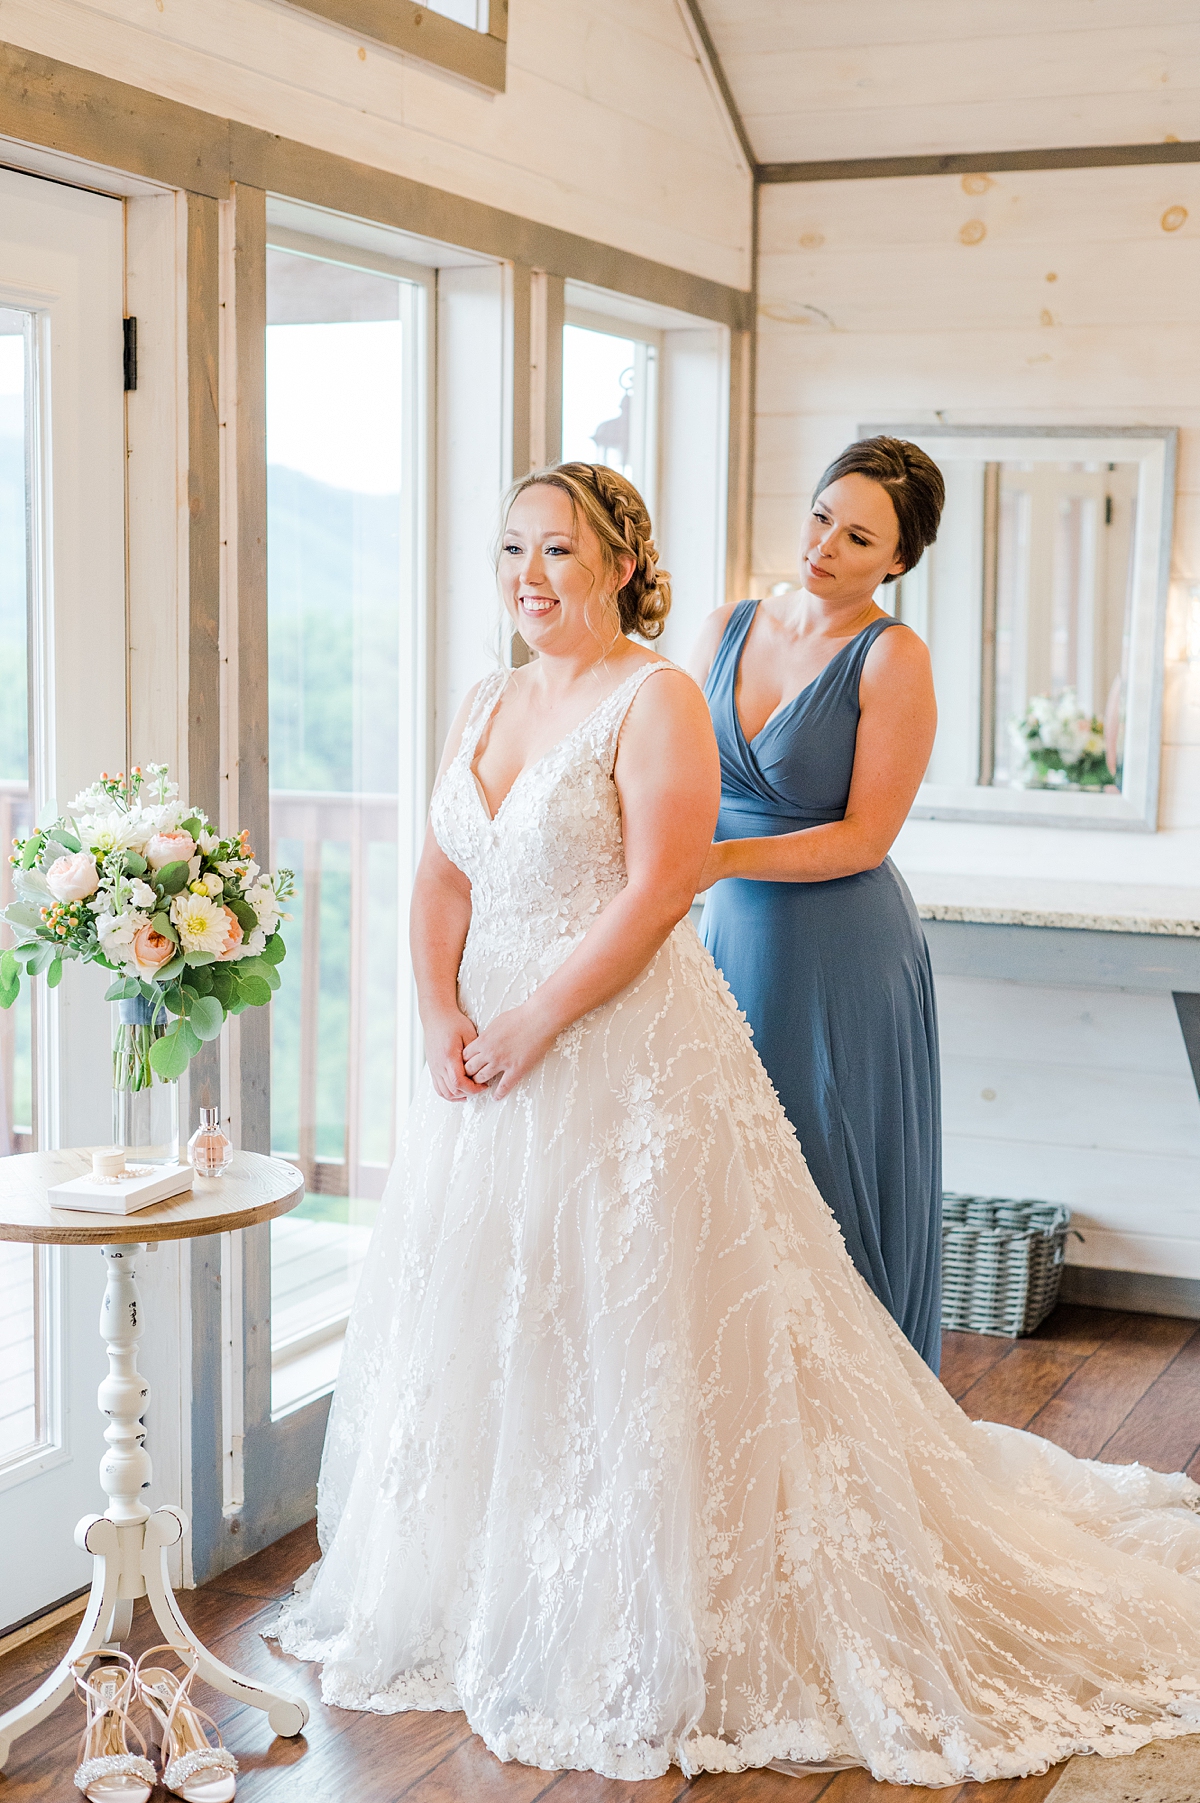 Bridal Portraits at The Magnolia Venue in Tennessee. Wedding Photography by Virginia Wedding Photographer Kailey Brianne Photography. 